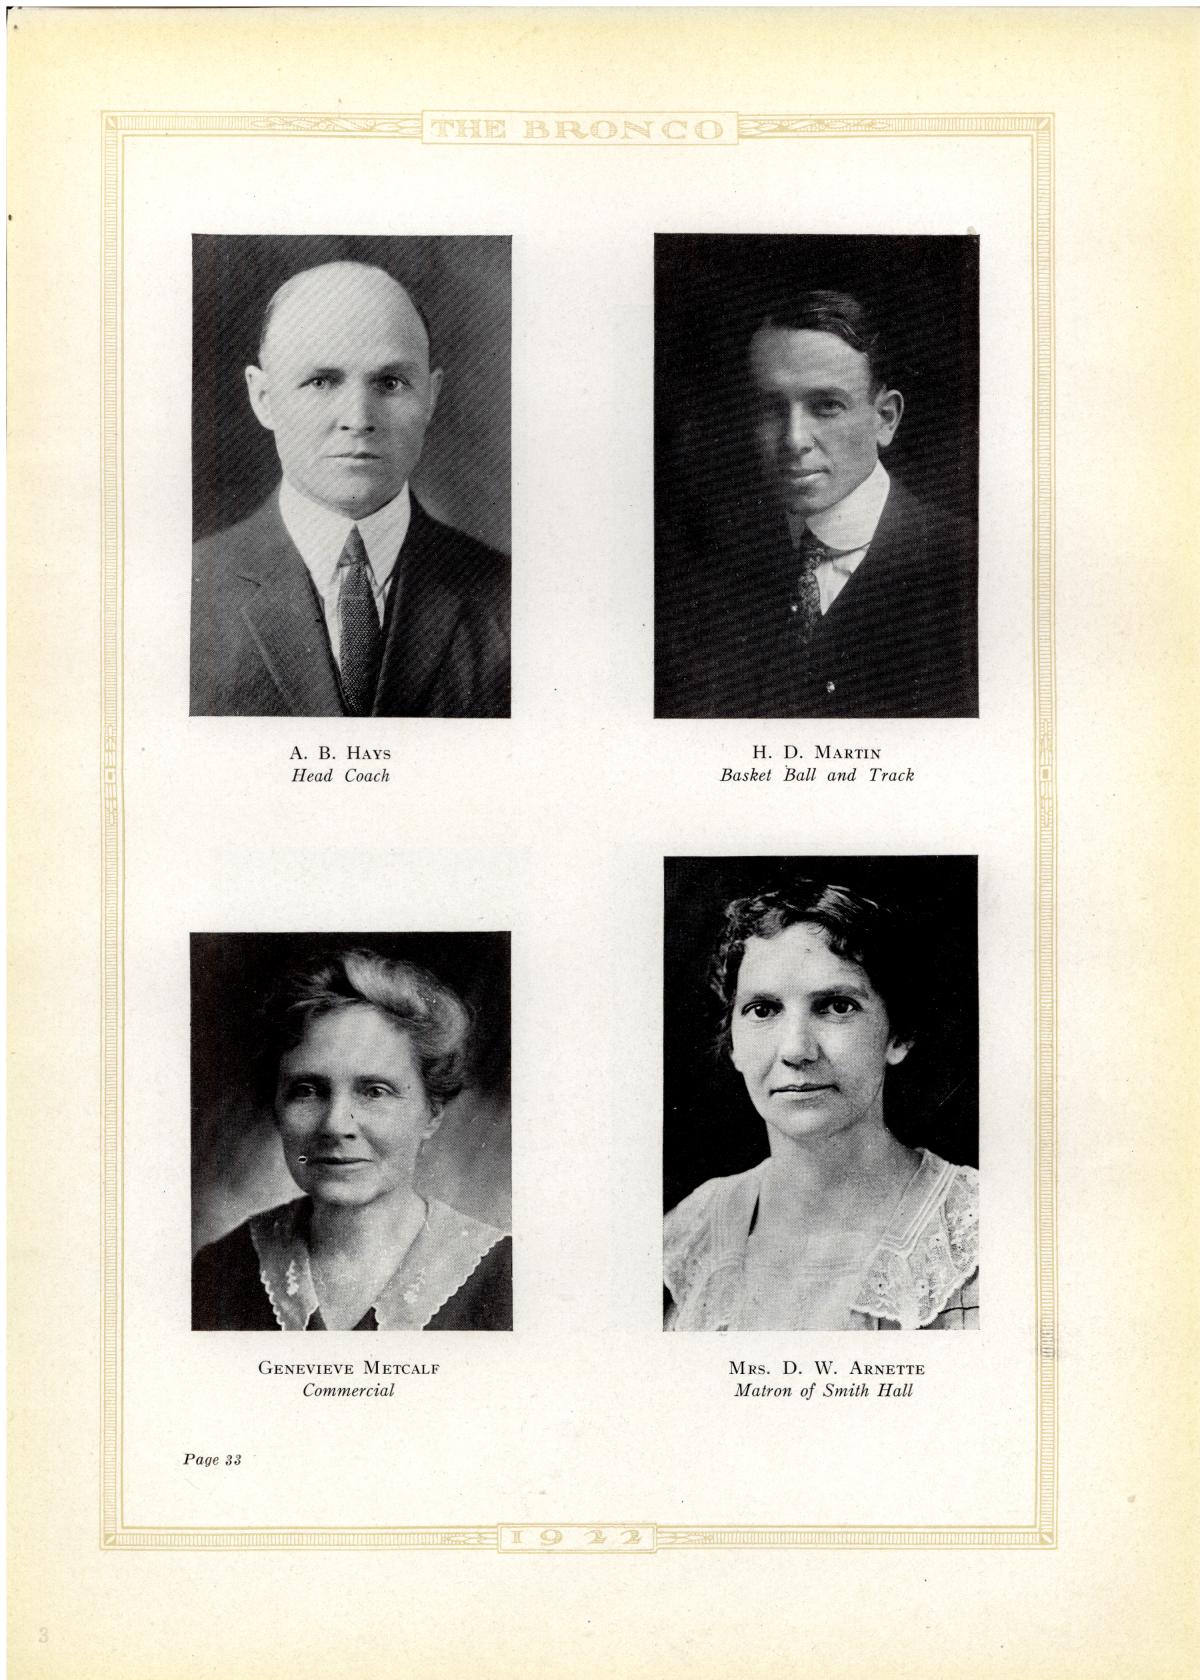 The Bronco, Yearbook of Simmons College, 1922
                                                
                                                    33
                                                